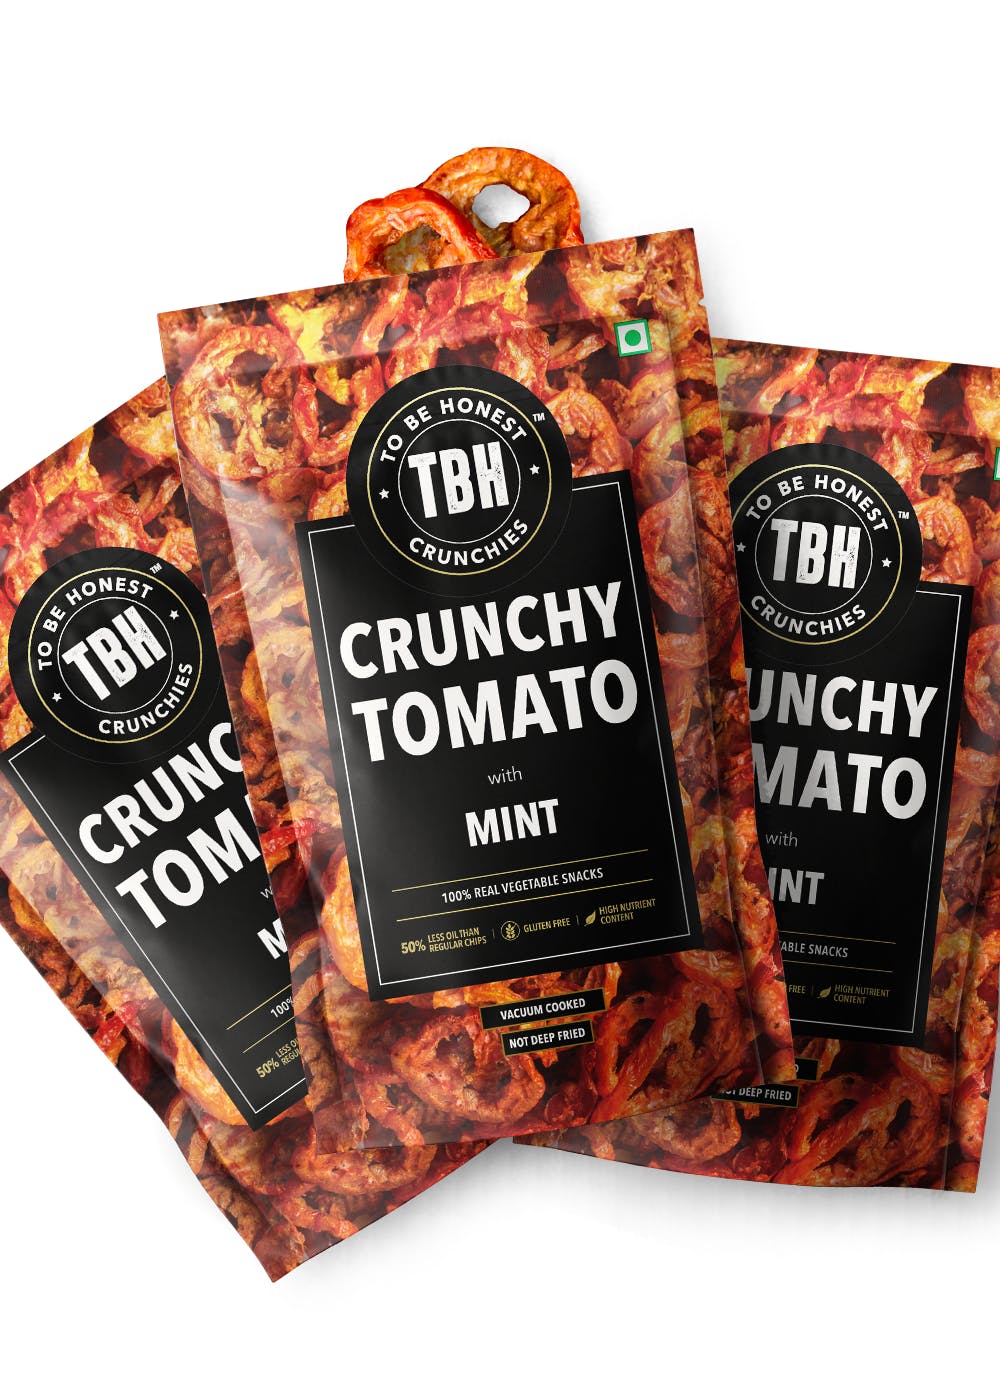 Crunchy Tomato Crunchies - Pack of 3